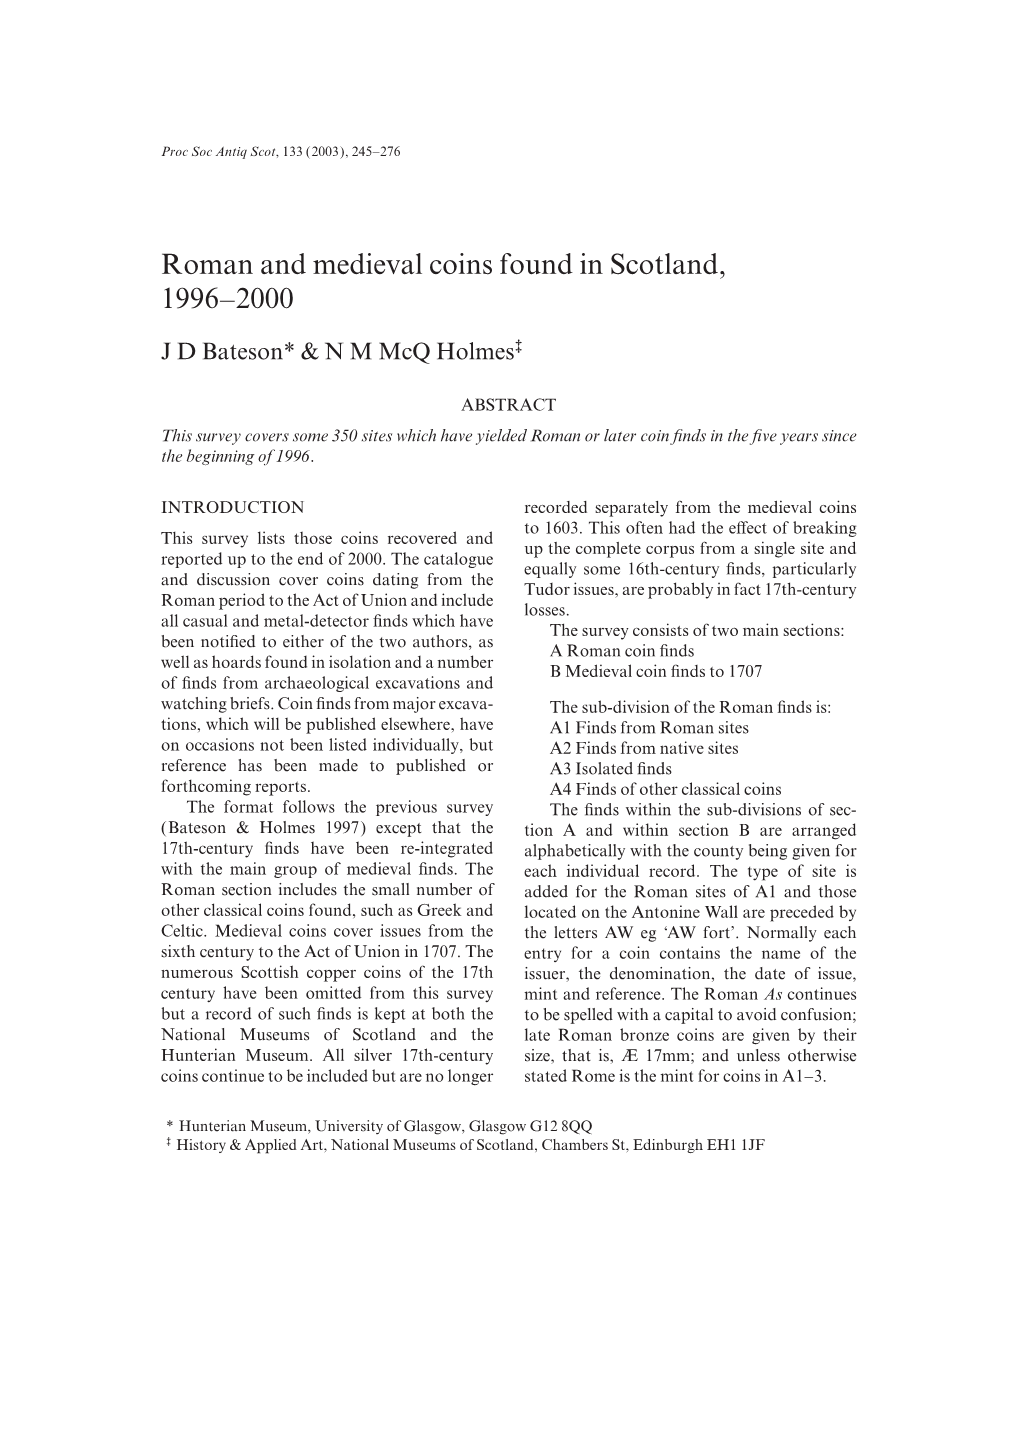 Roman and Medieval Coins Found in Scotland, 1996–2000